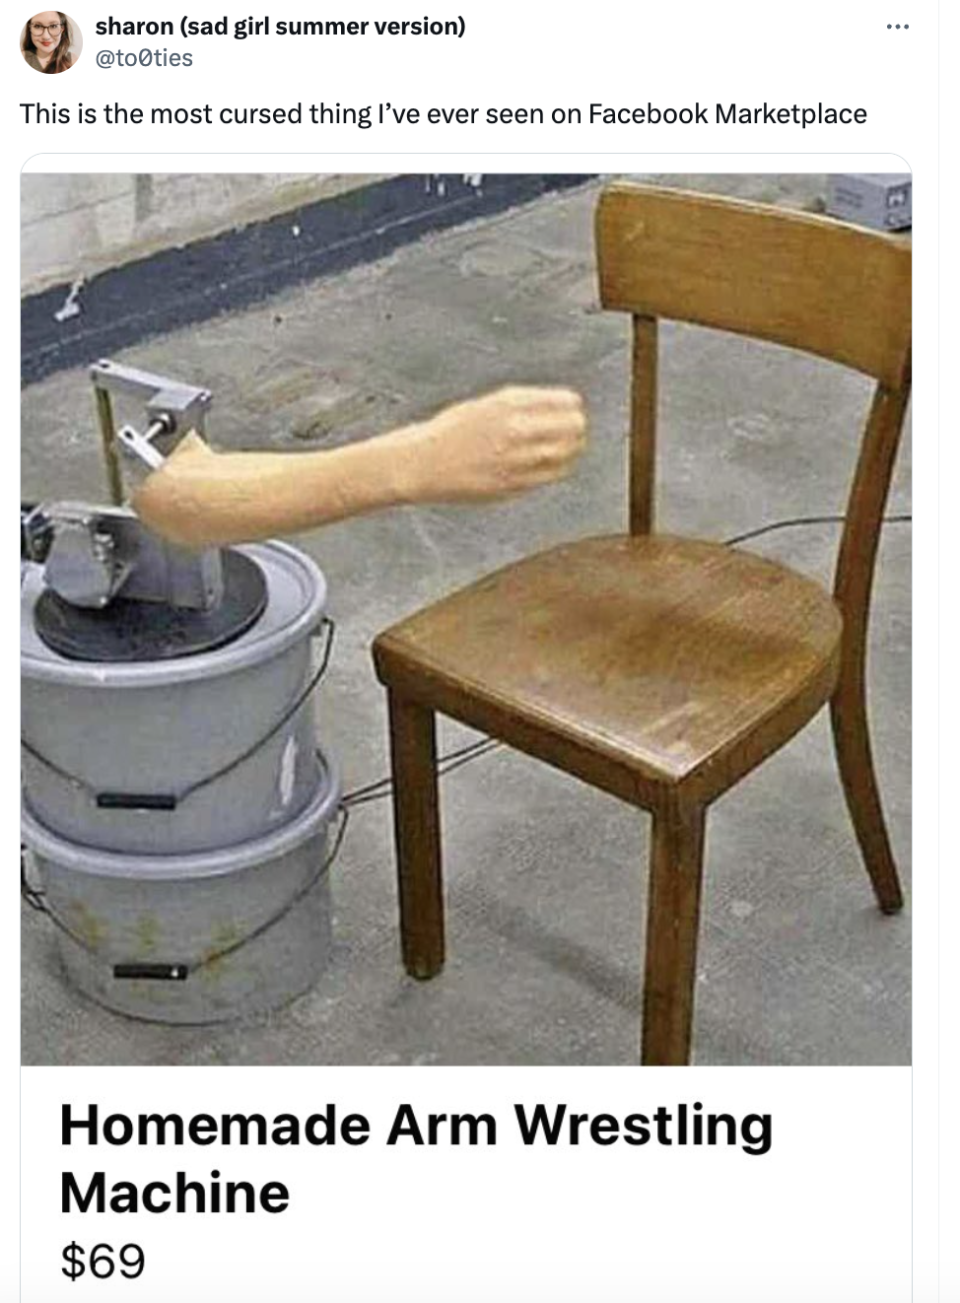 Wooden chair modified with fake human arm for arm wrestling, labeled 